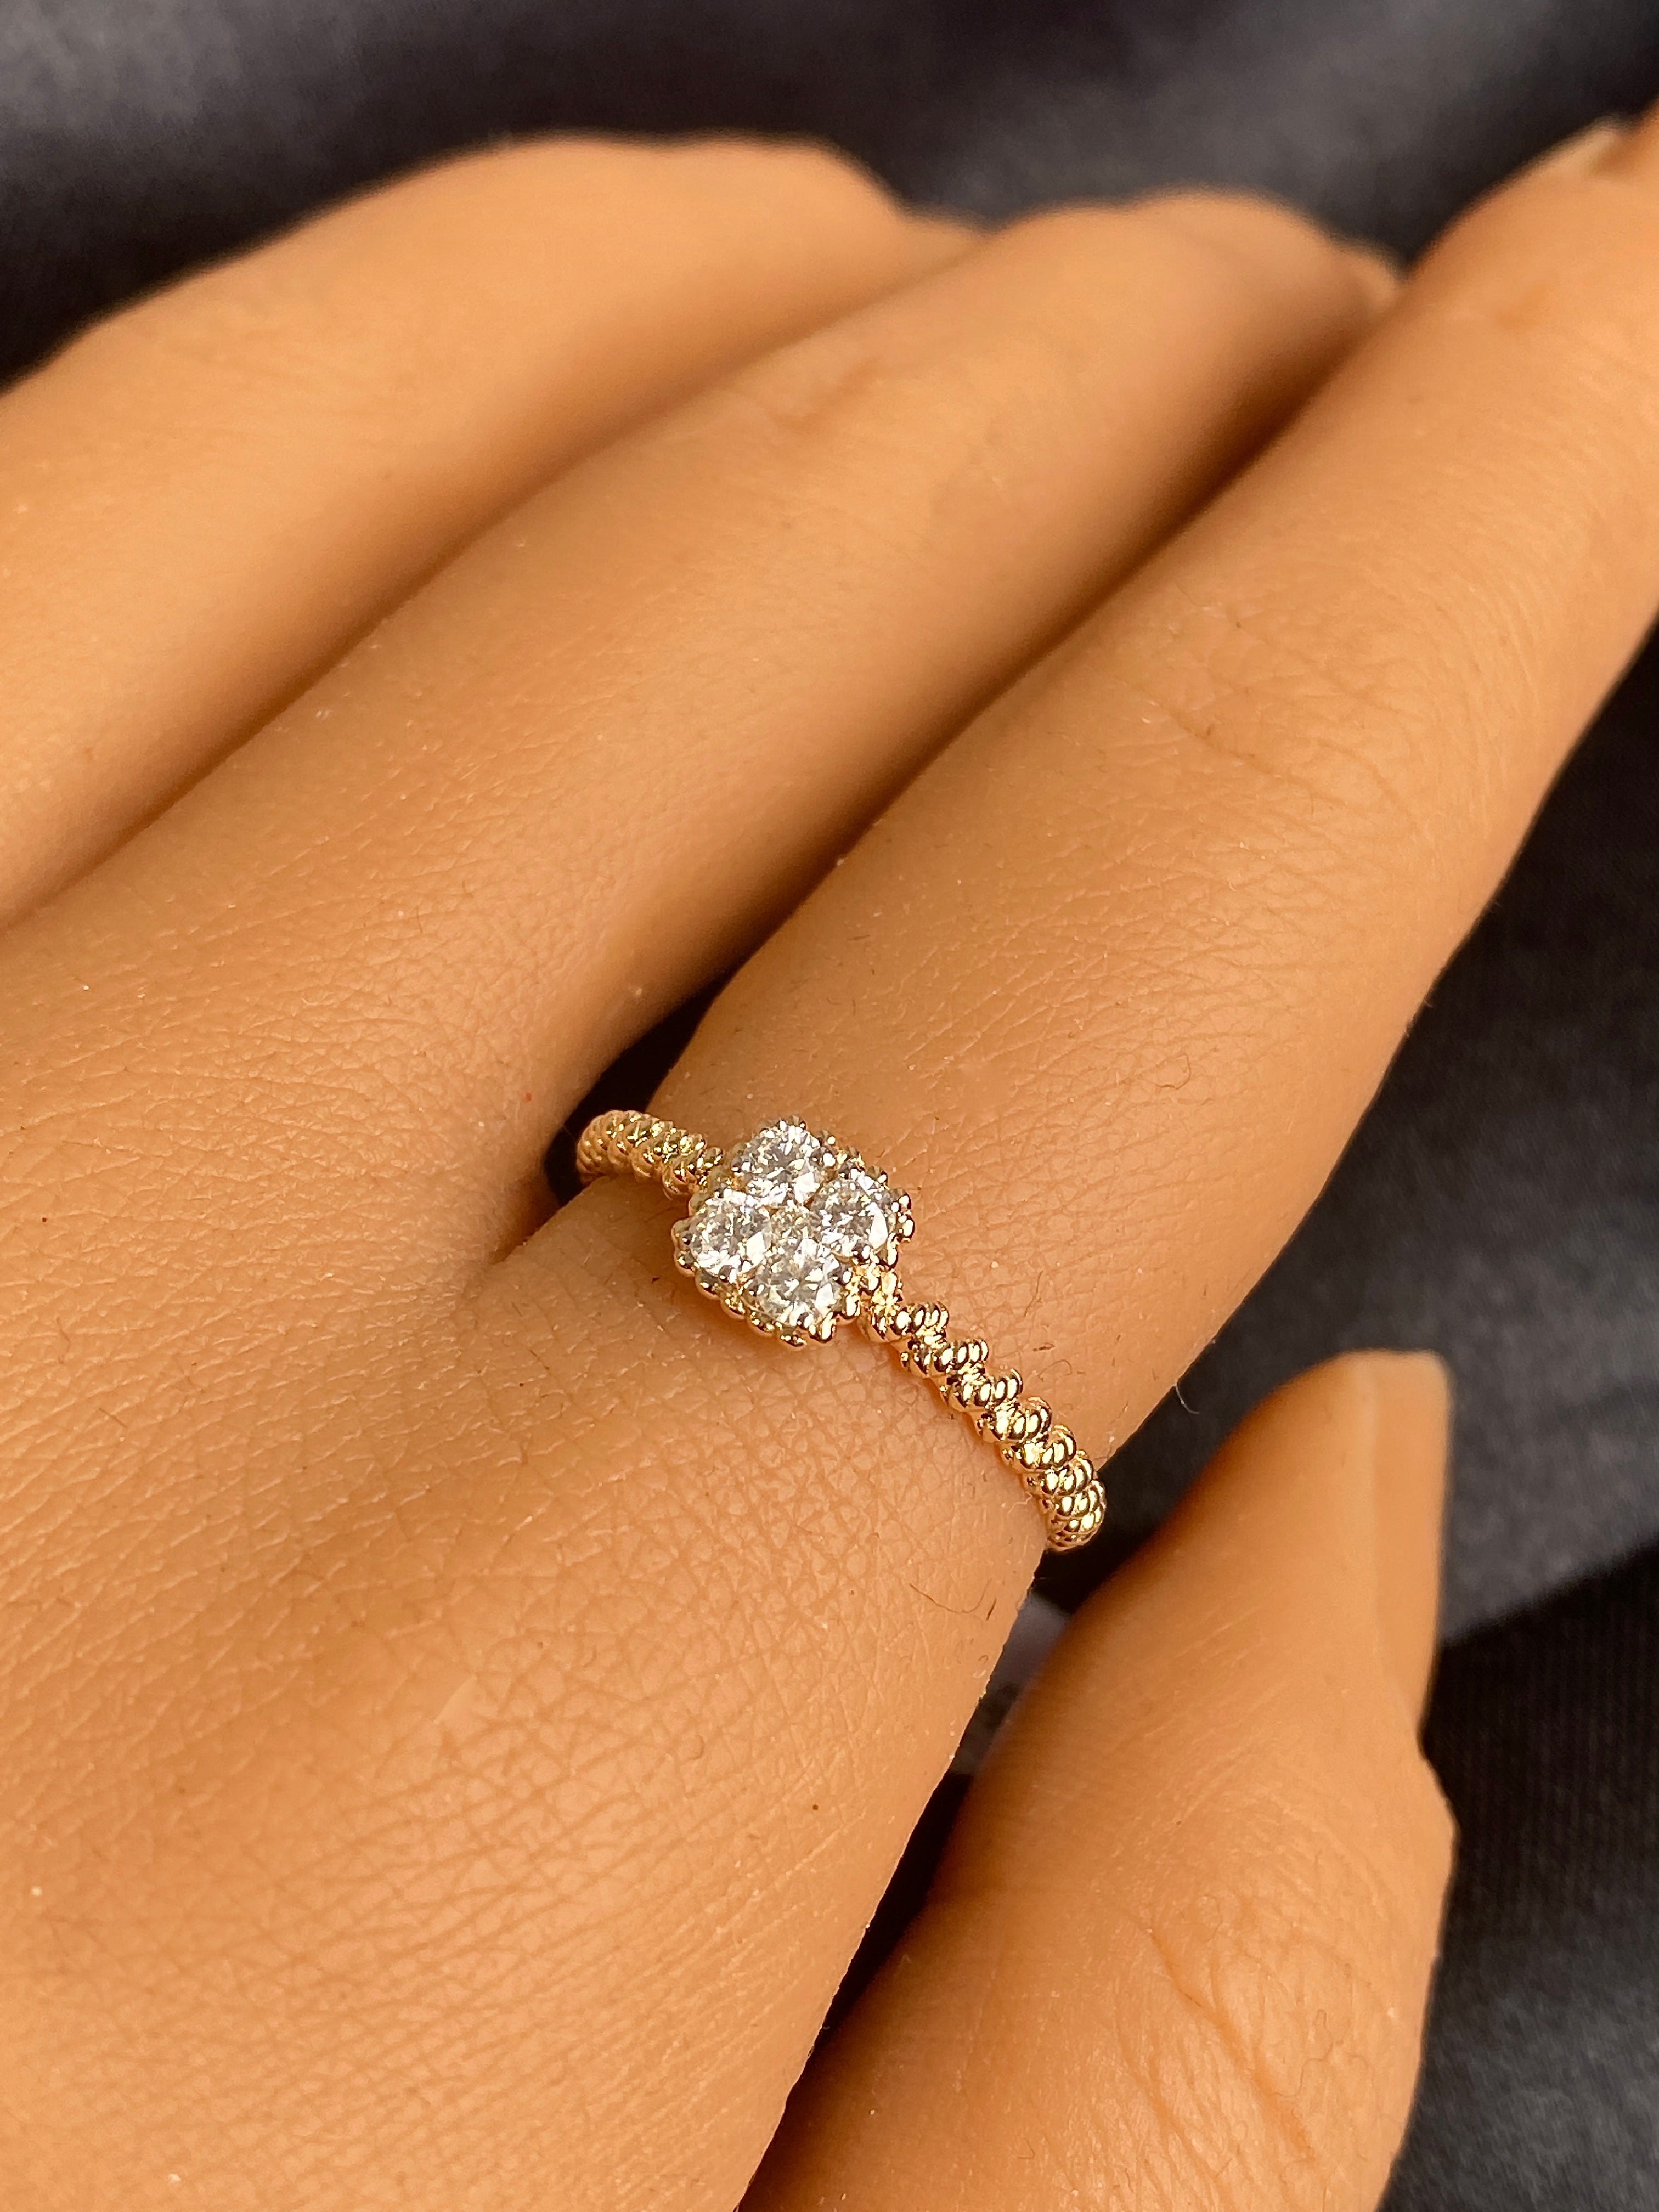 Diamond Cluster Ring, Solid Gold Solitaire Ring, Natural Diamond 14k Gold Ring